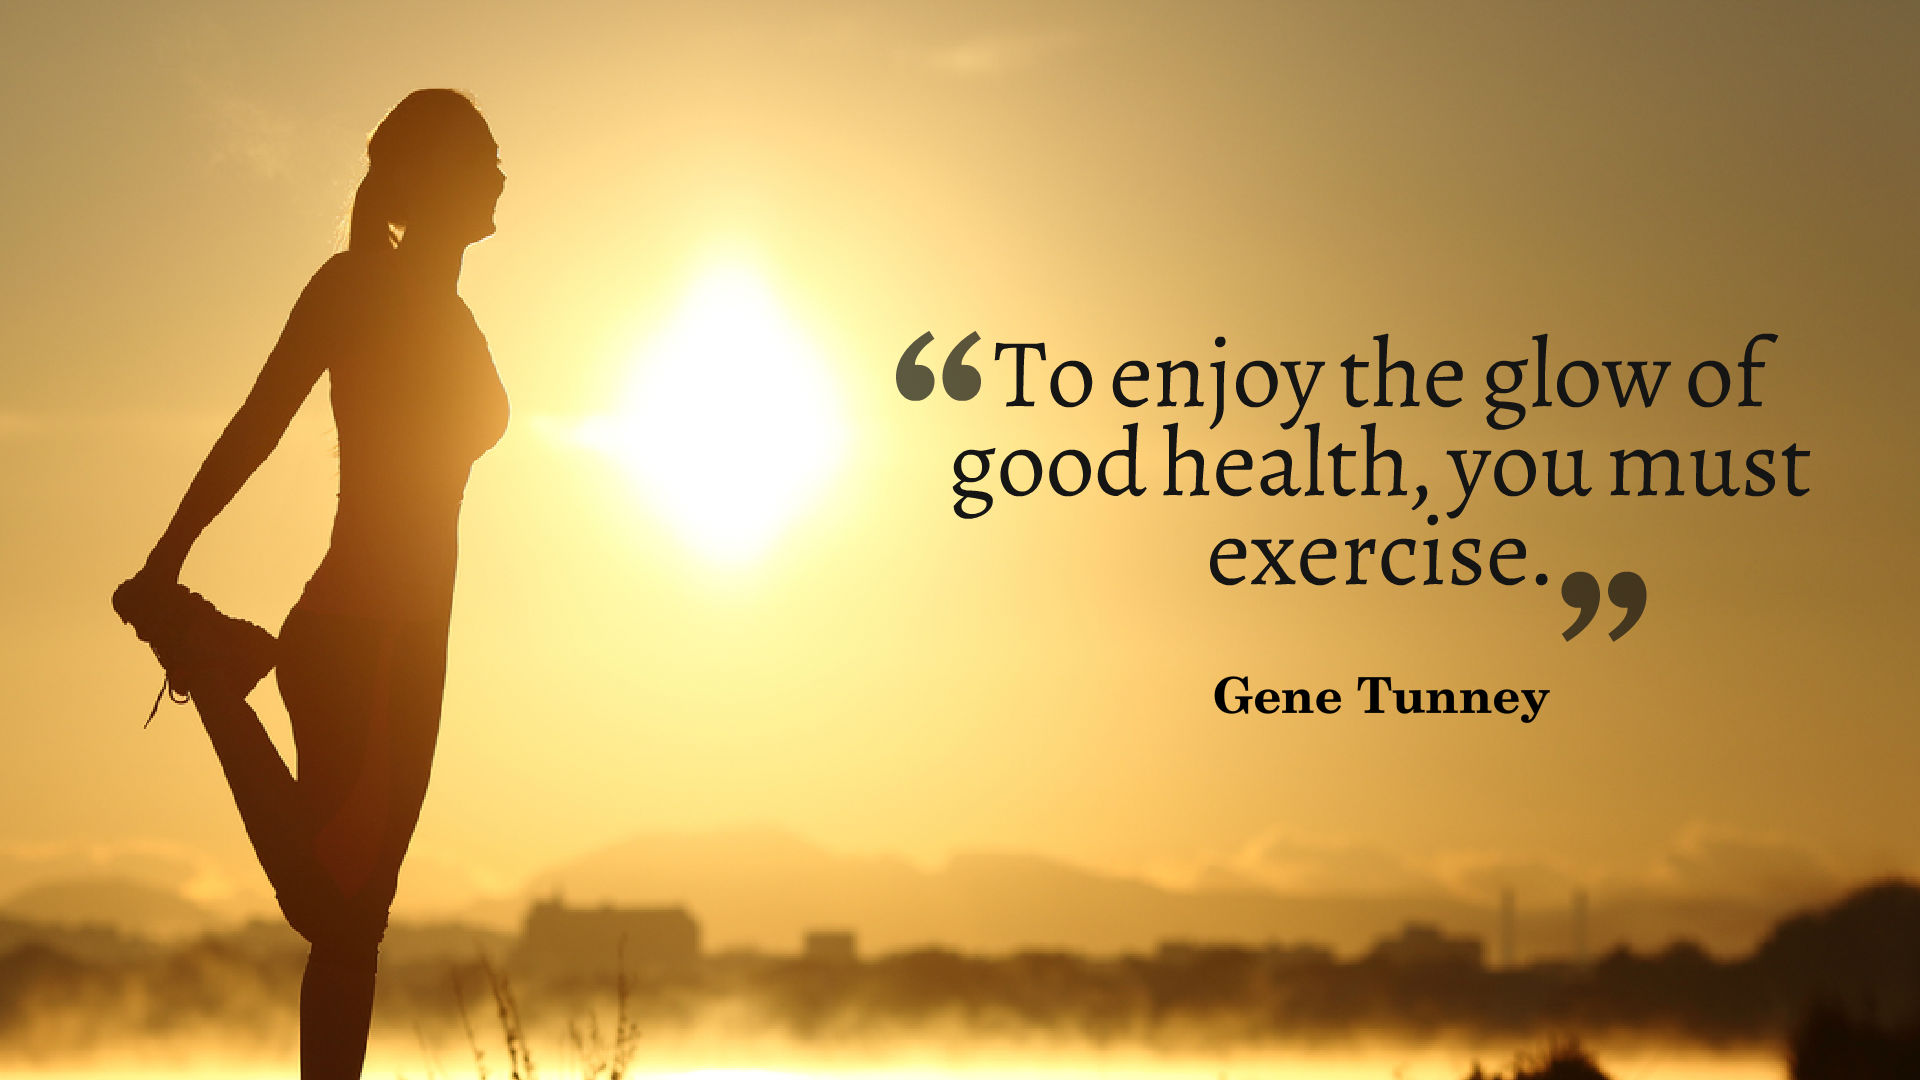 Fitness Quotes Desktop Wallpaper - Exercise In Morning - HD Wallpaper 